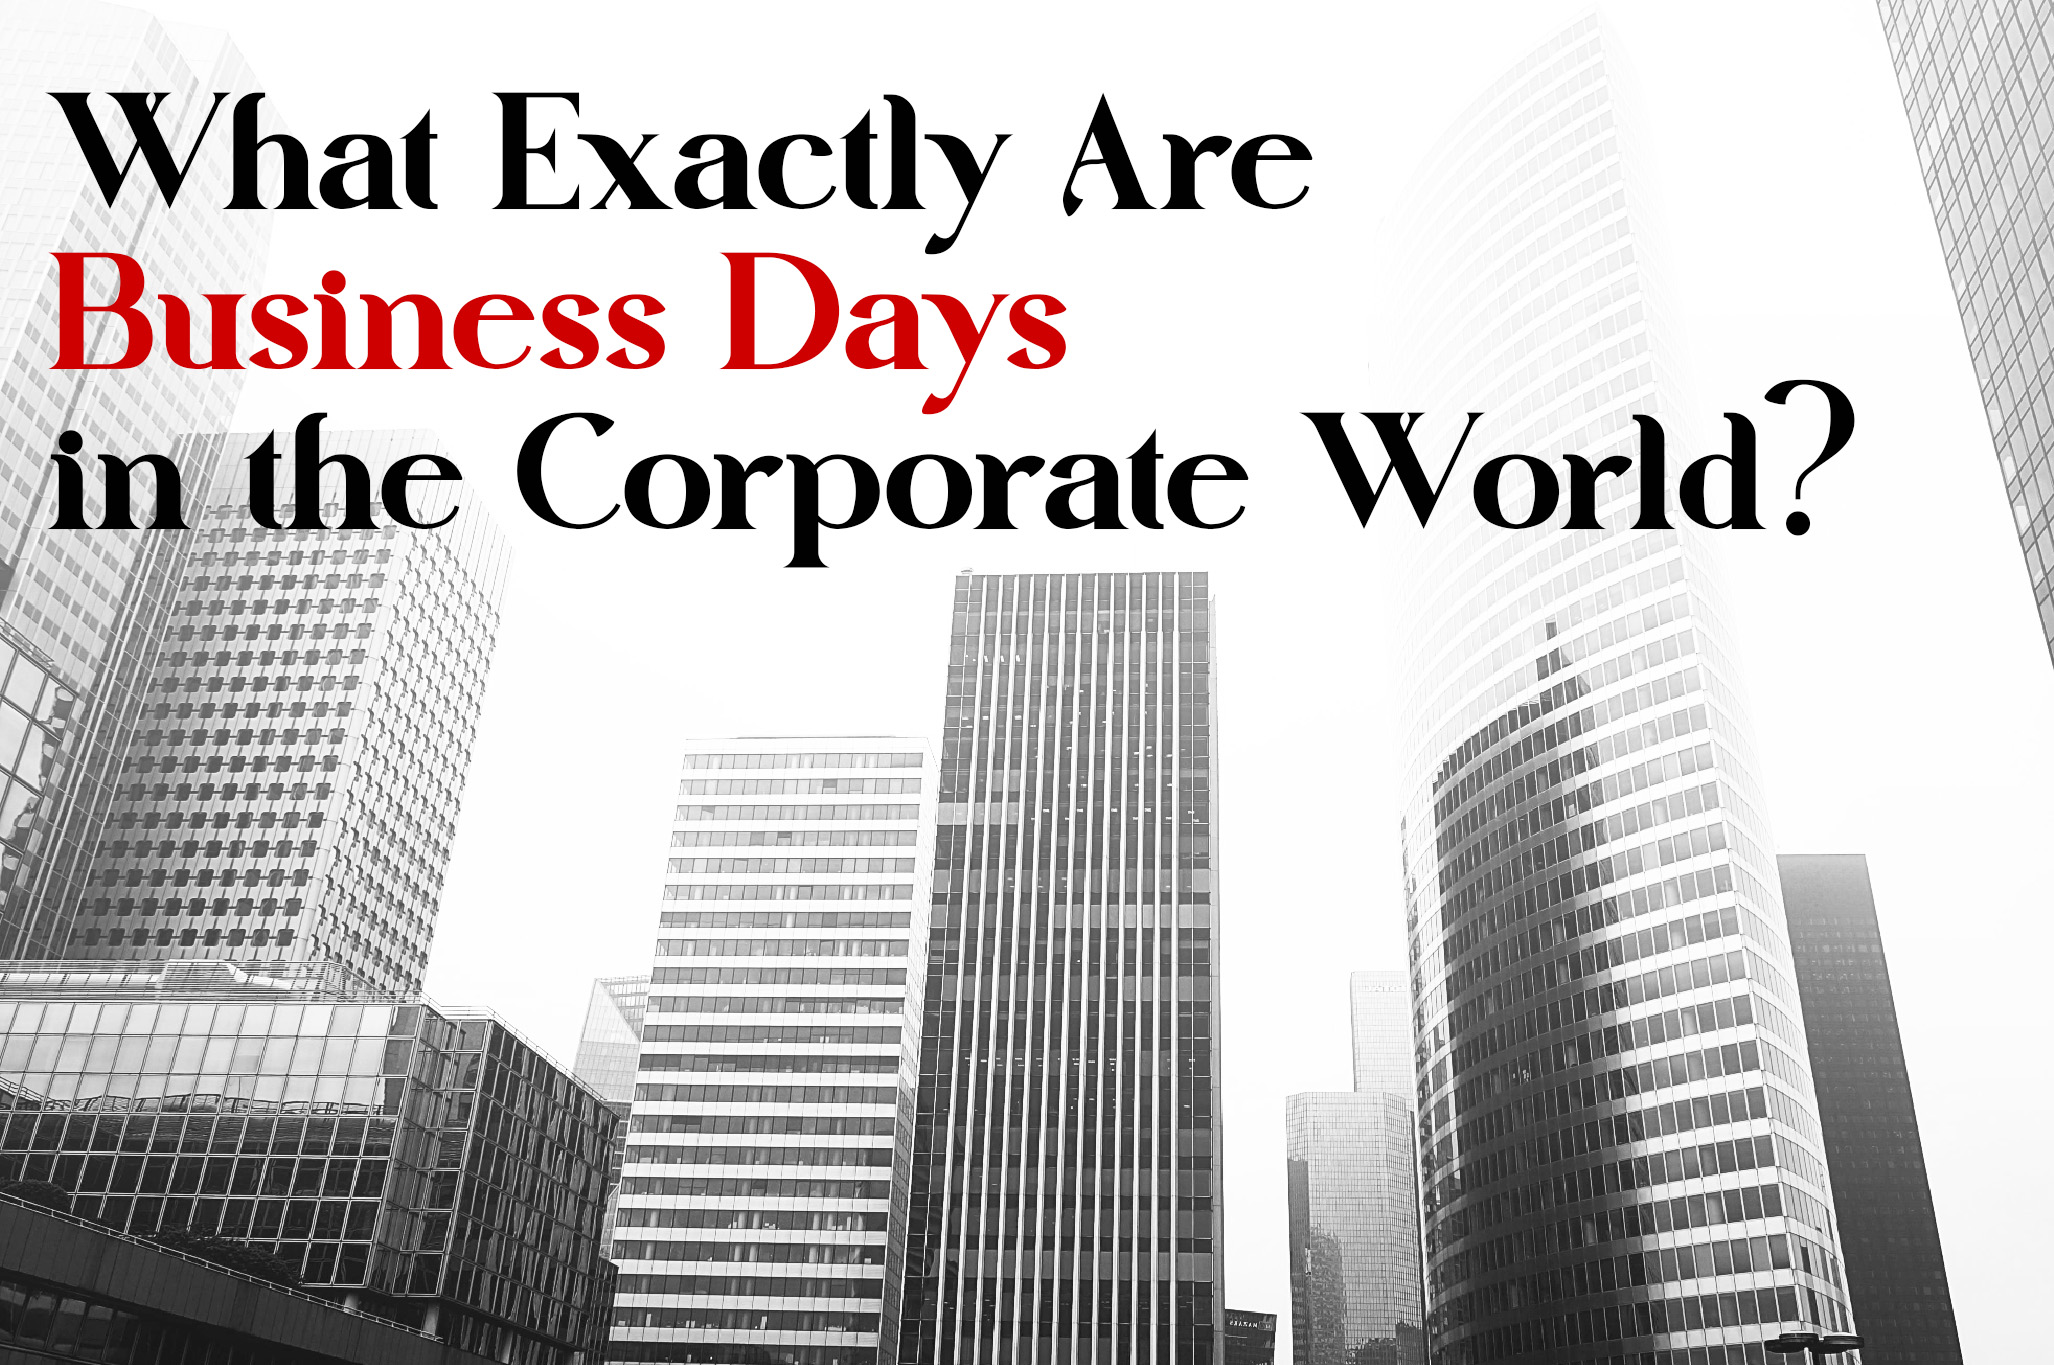 What Exactly Are Business Days in the Corporate World?